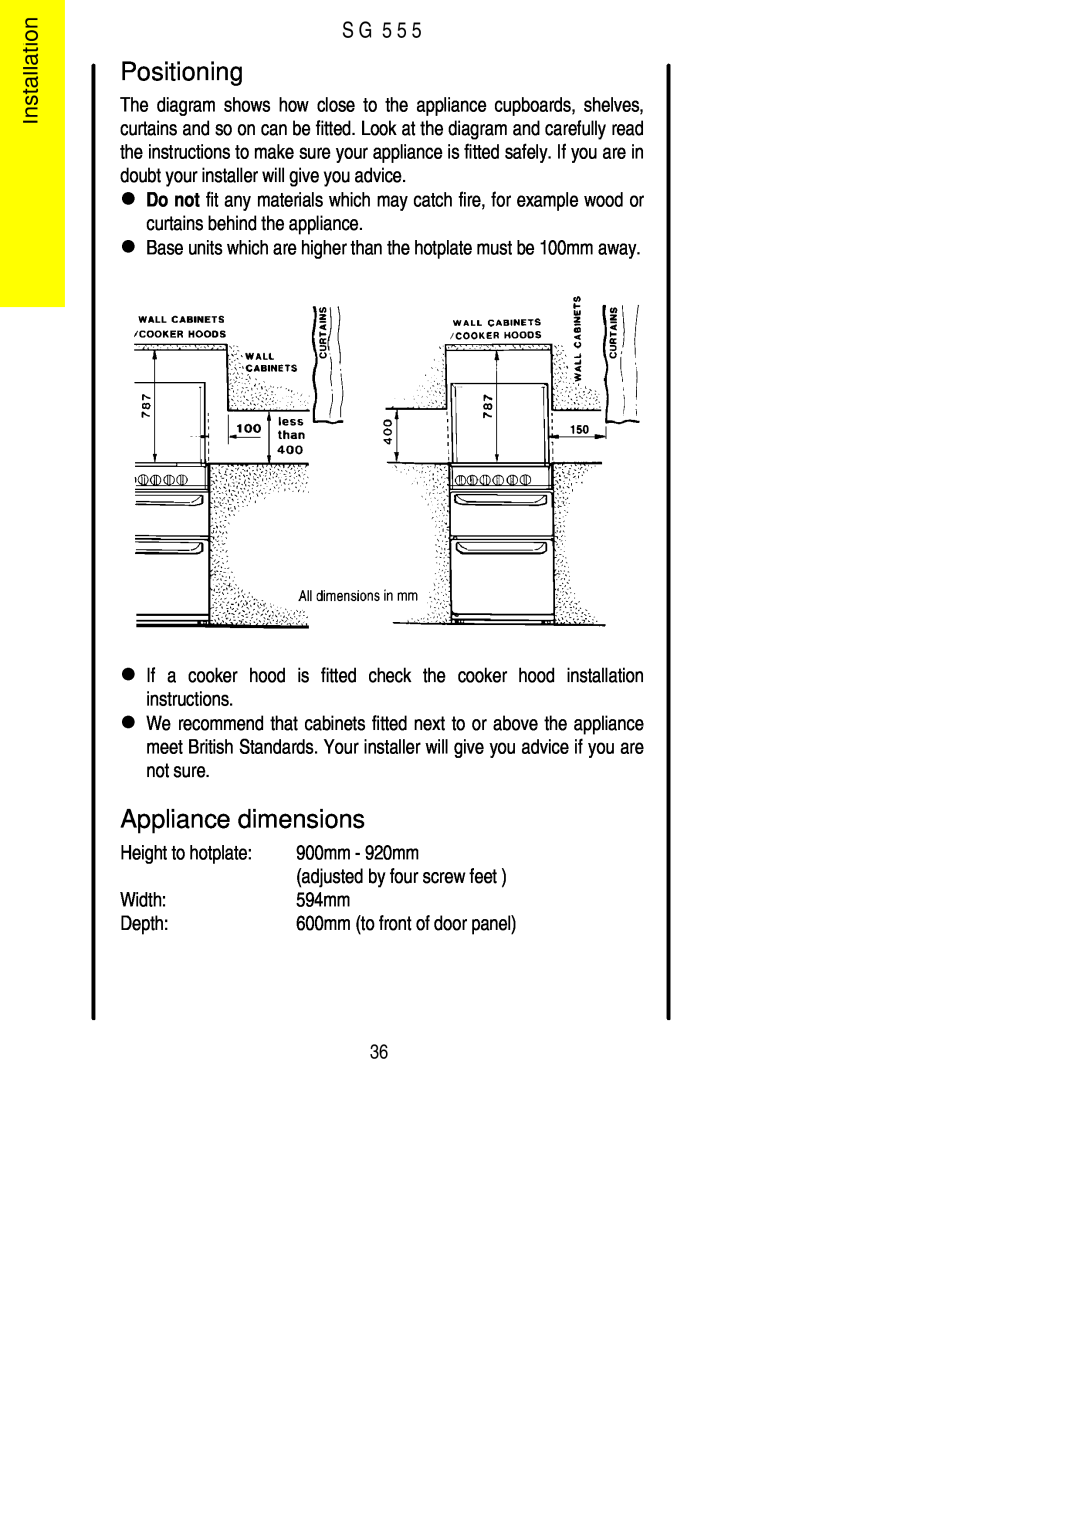 Electrolux SG 555 installation instructions Positioning, Appliance dimensions, Installation, S G 5 5 